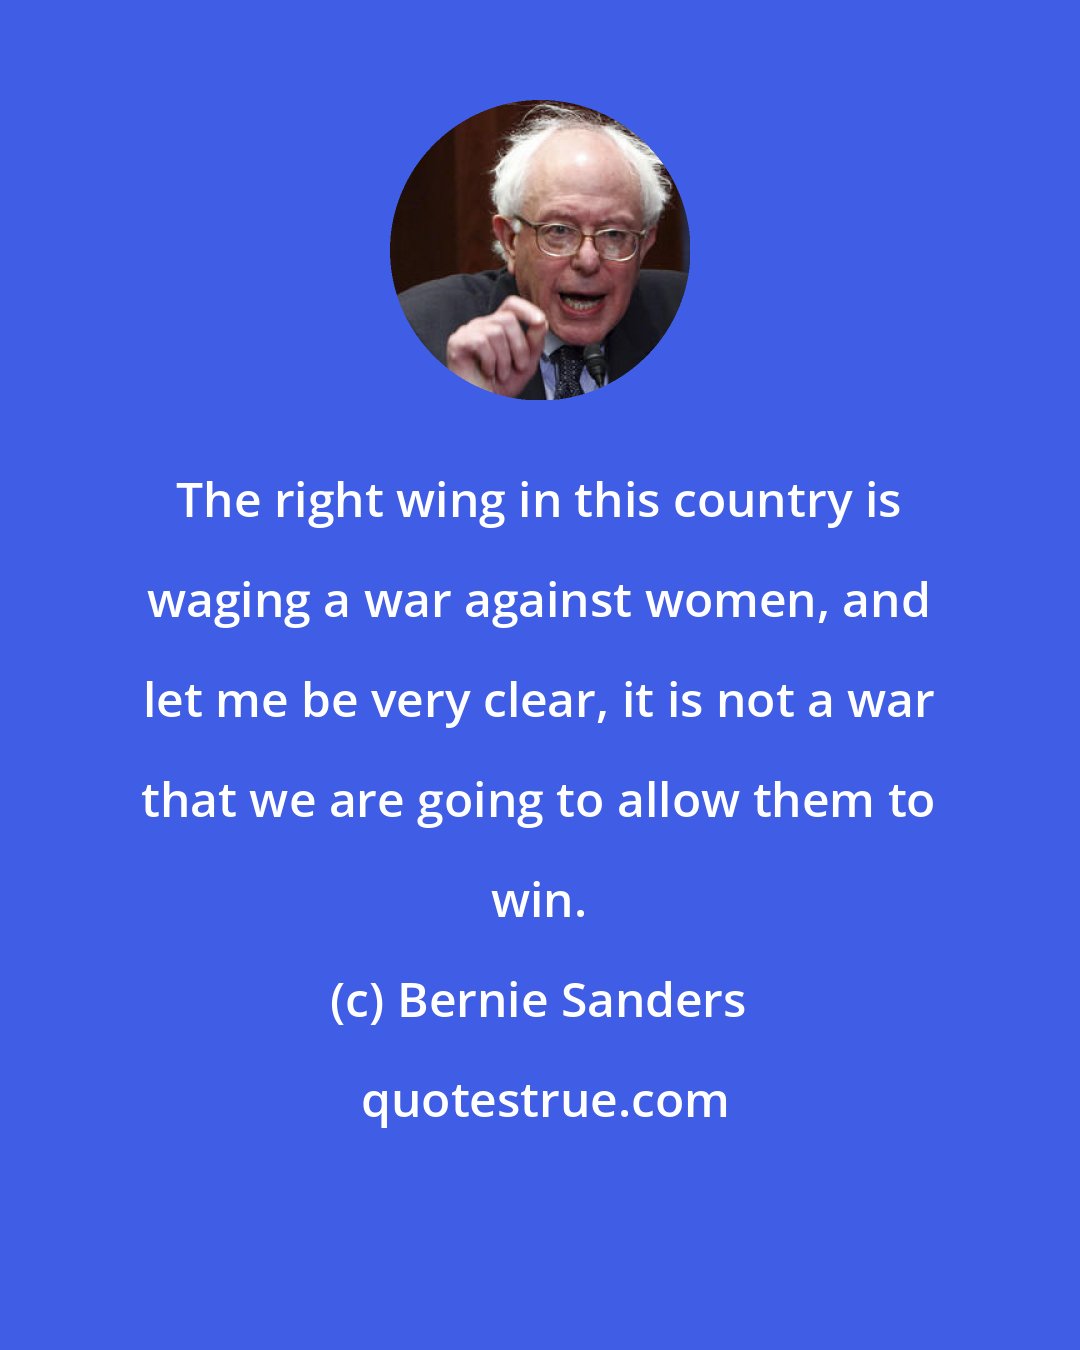 Bernie Sanders: The right wing in this country is waging a war against women, and let me be very clear, it is not a war that we are going to allow them to win.